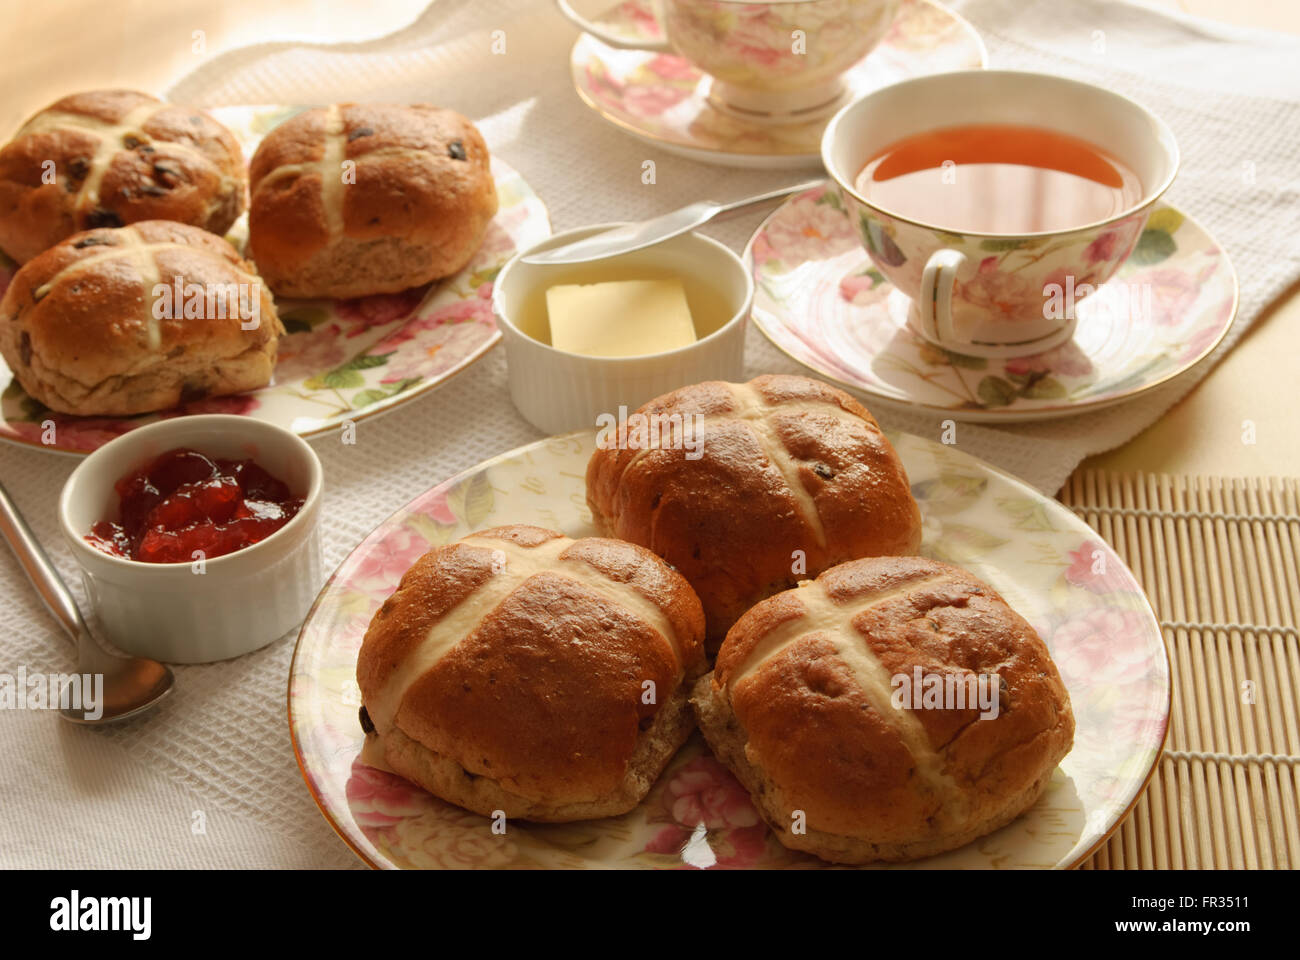 Table set with hot cross buns and tea for Easter Stock Photo